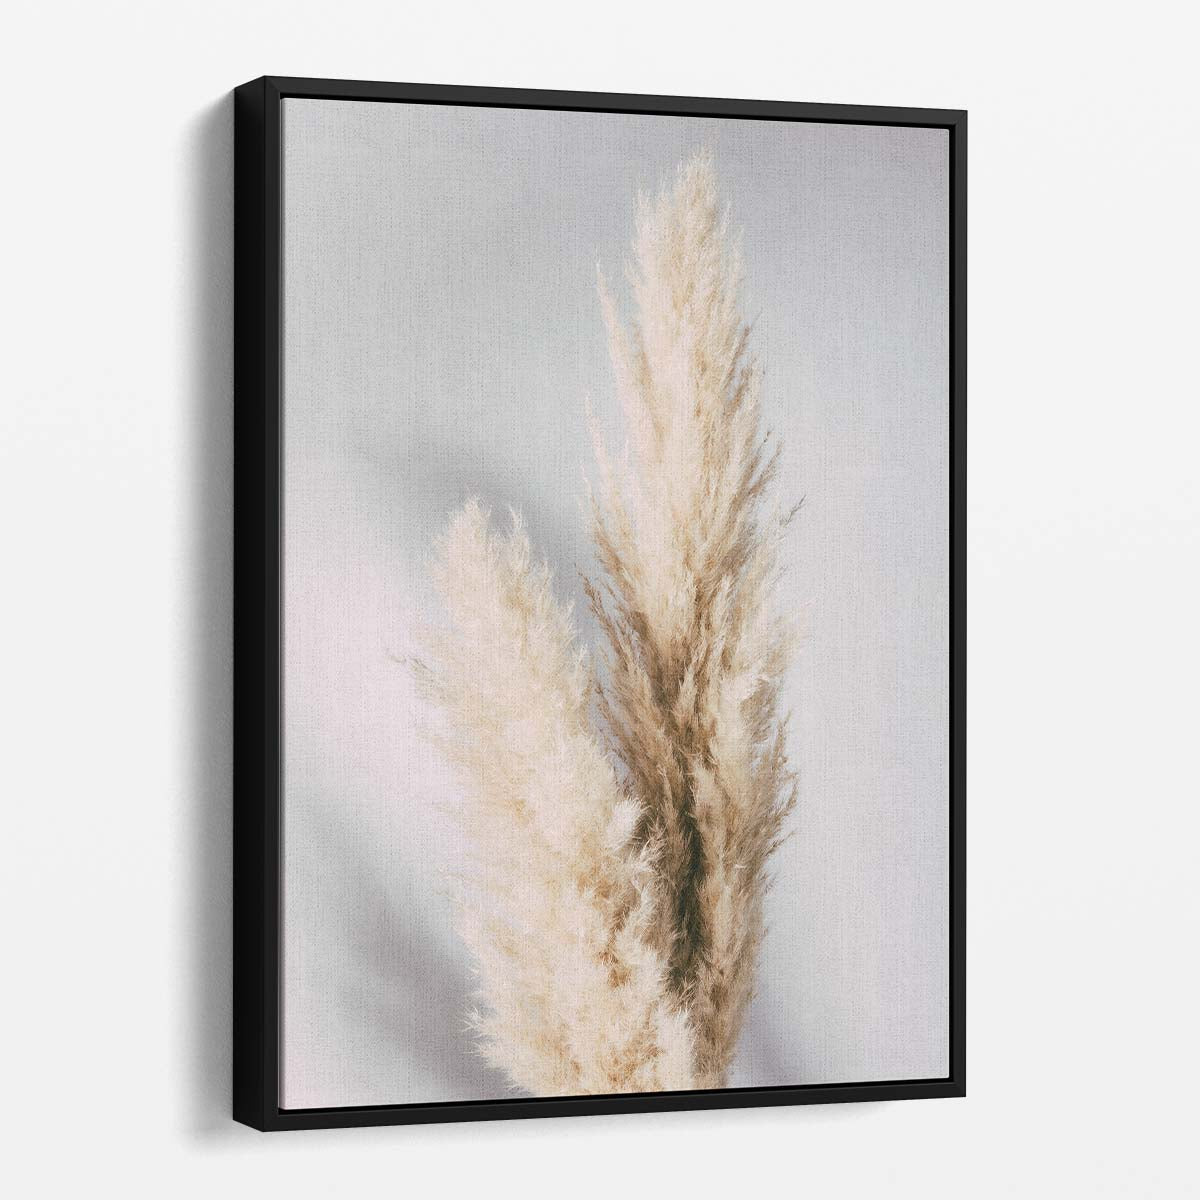 Soft Dried Pampas Grass Botanical Photography Wall Art - 1XStudio by Luxuriance Designs, made in USA